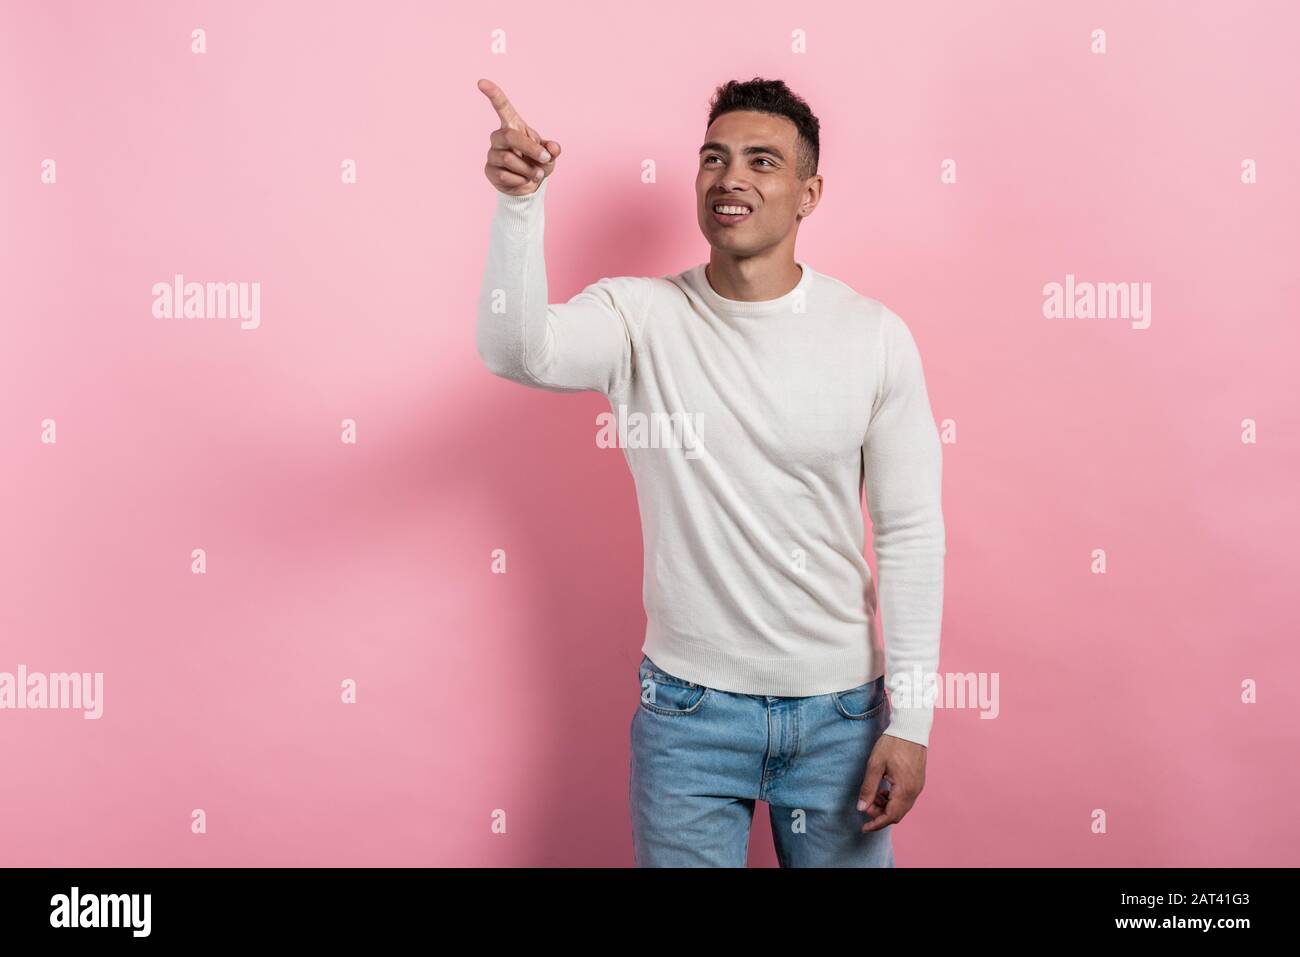 Happy mulatto man standing and pointing by his hand to a space. Copy space - Image Stock Photo